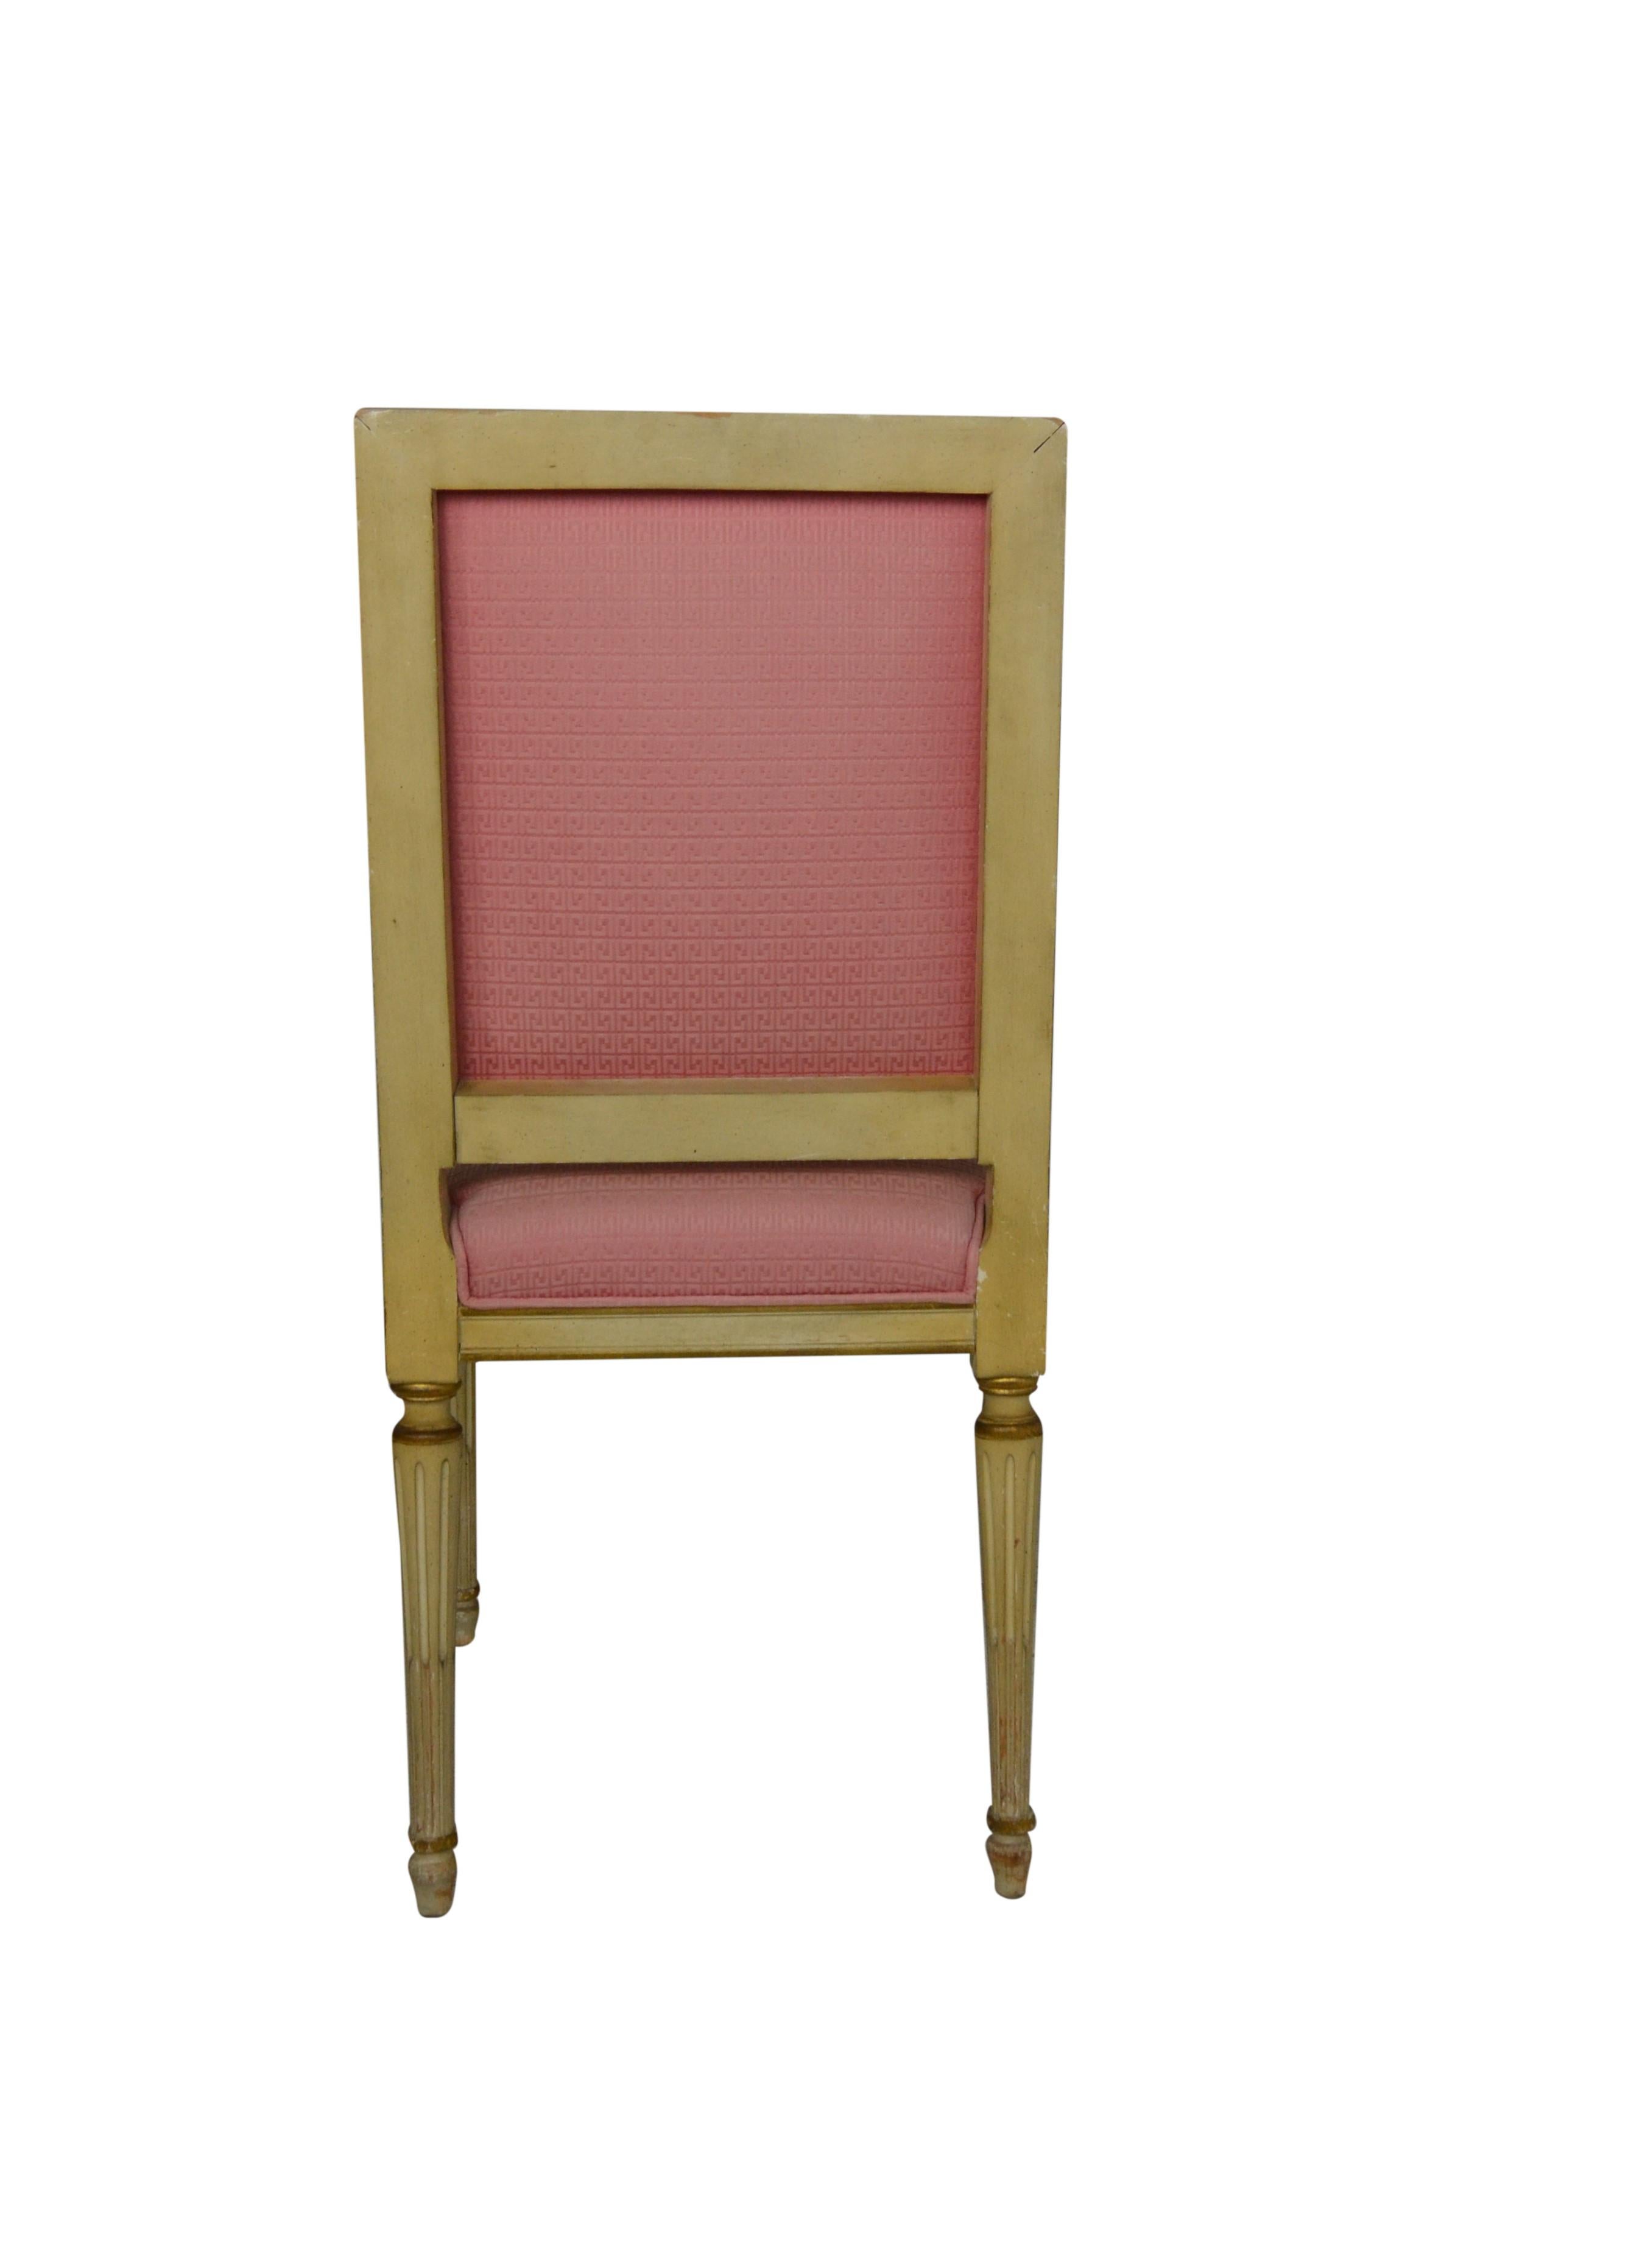 A set of 6 Louis XVI French dining chairs with gilt highlights. Original upholstery in very good condition.